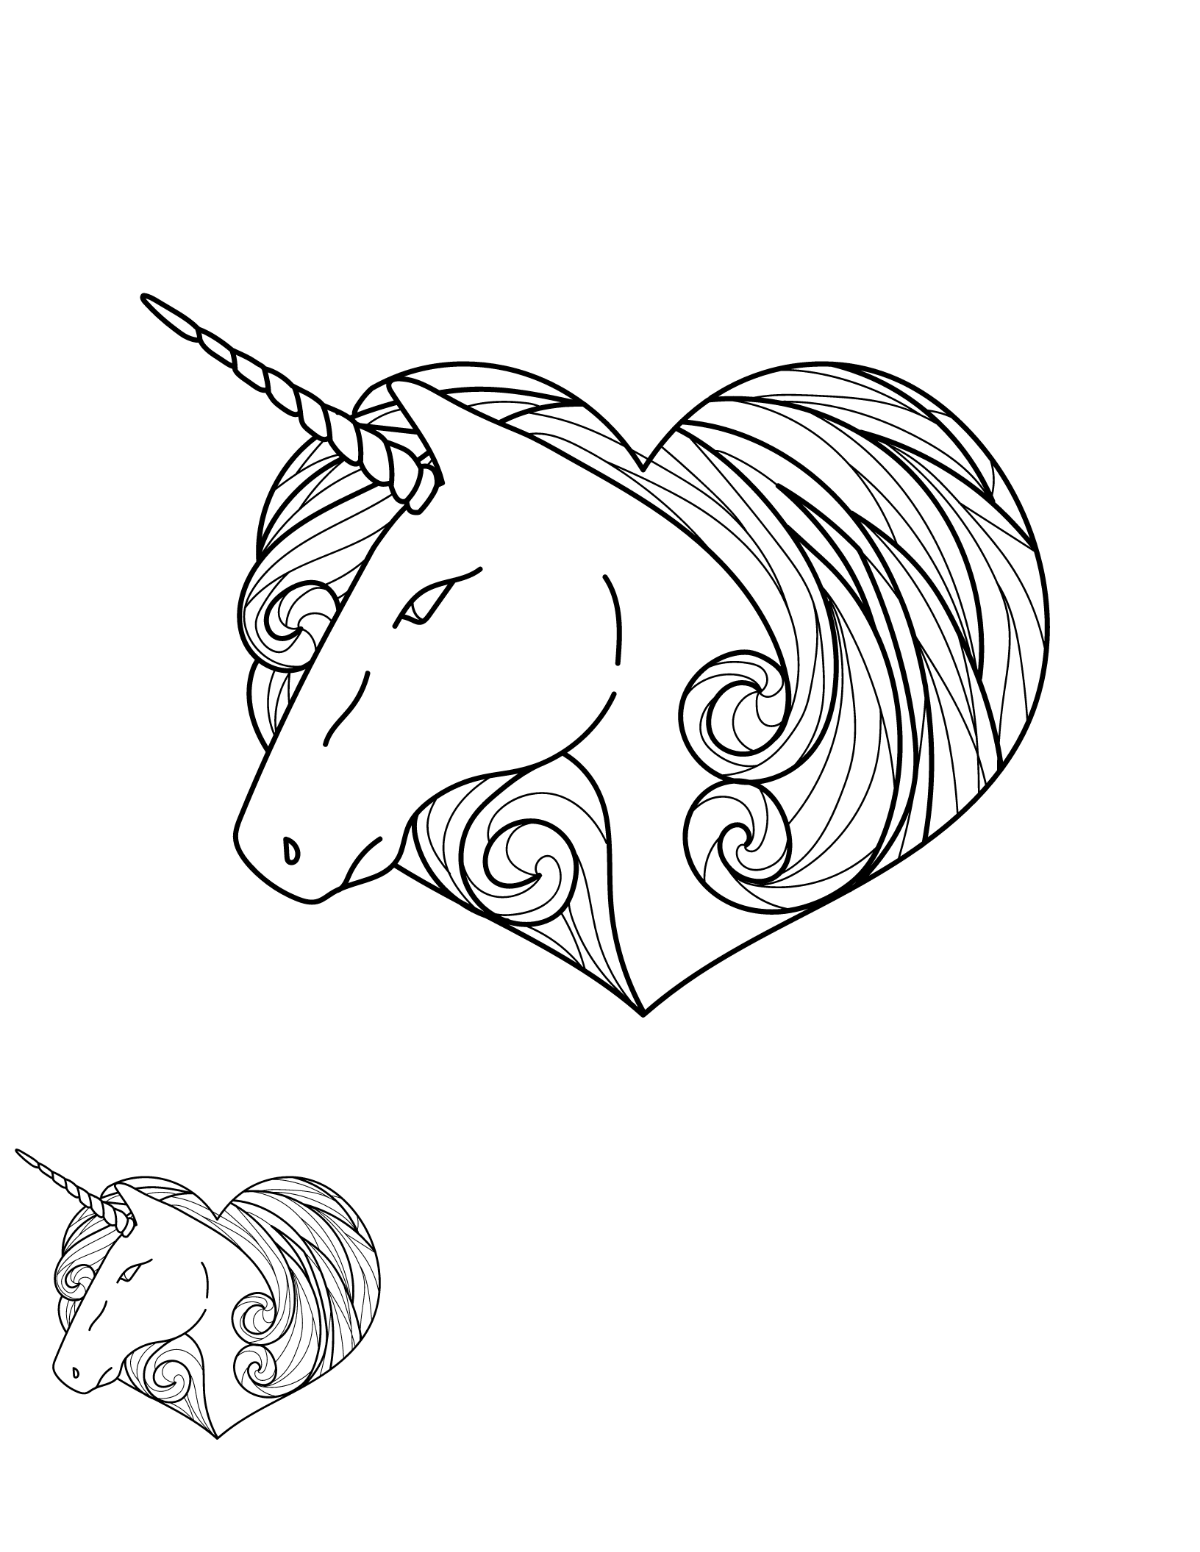 Unicorn Heart Coloring Page Template